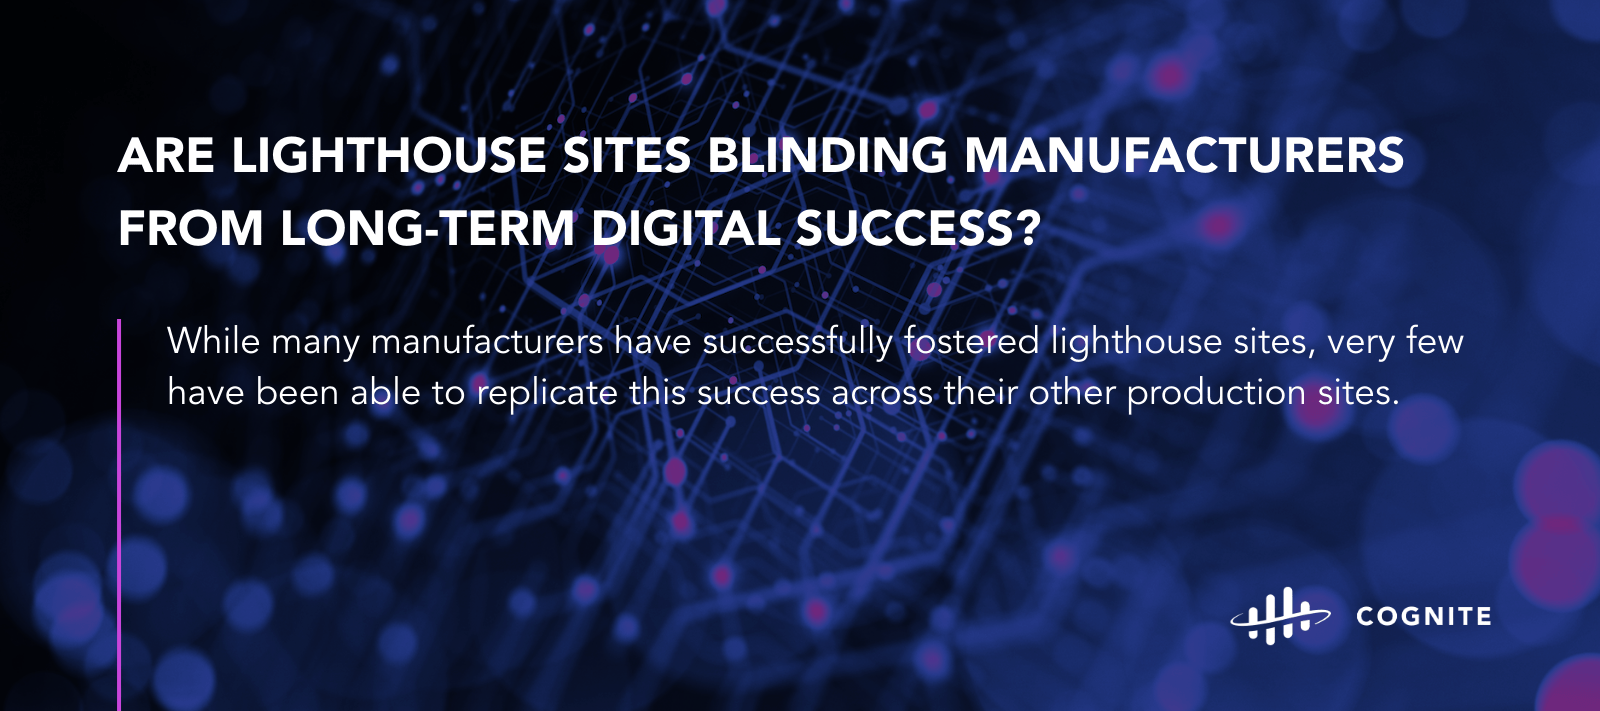 Are Lighthouse Sites Blinding Manufacturers from Long-Term Digital Success?